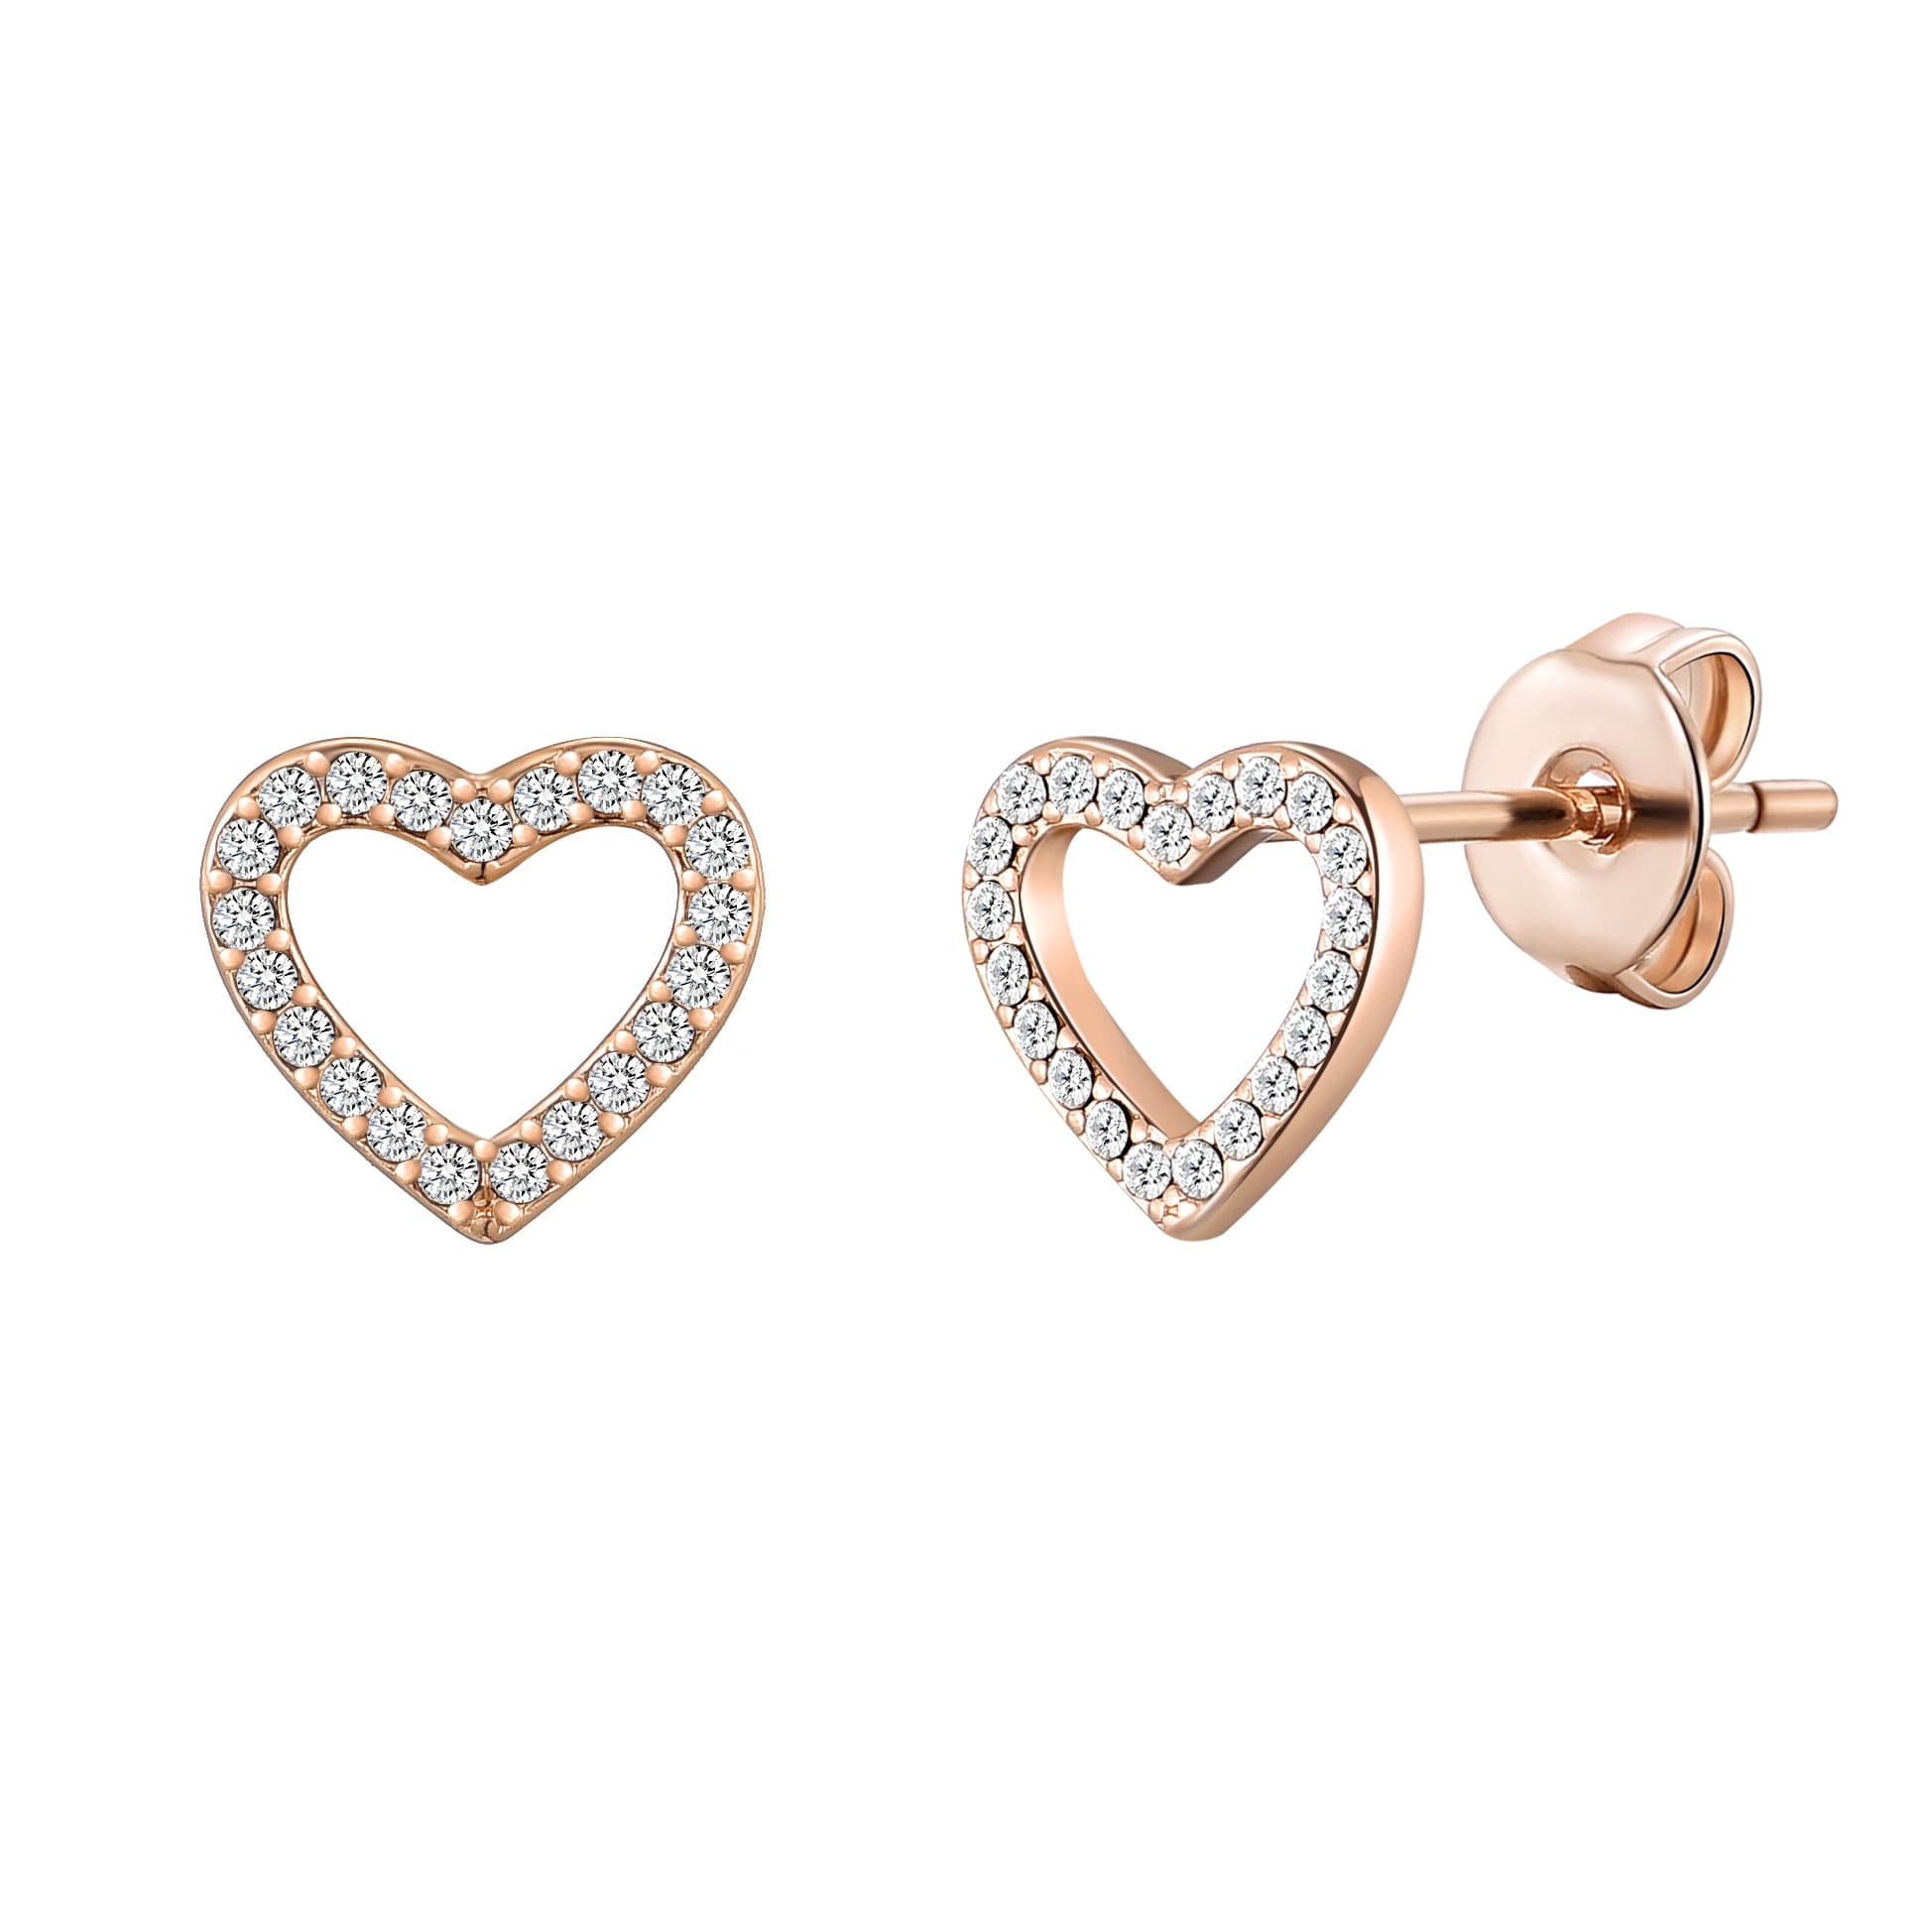 Rose Gold Plated Open Heart Earrings Created with Zircondia® Crystals by Philip Jones Jewellery